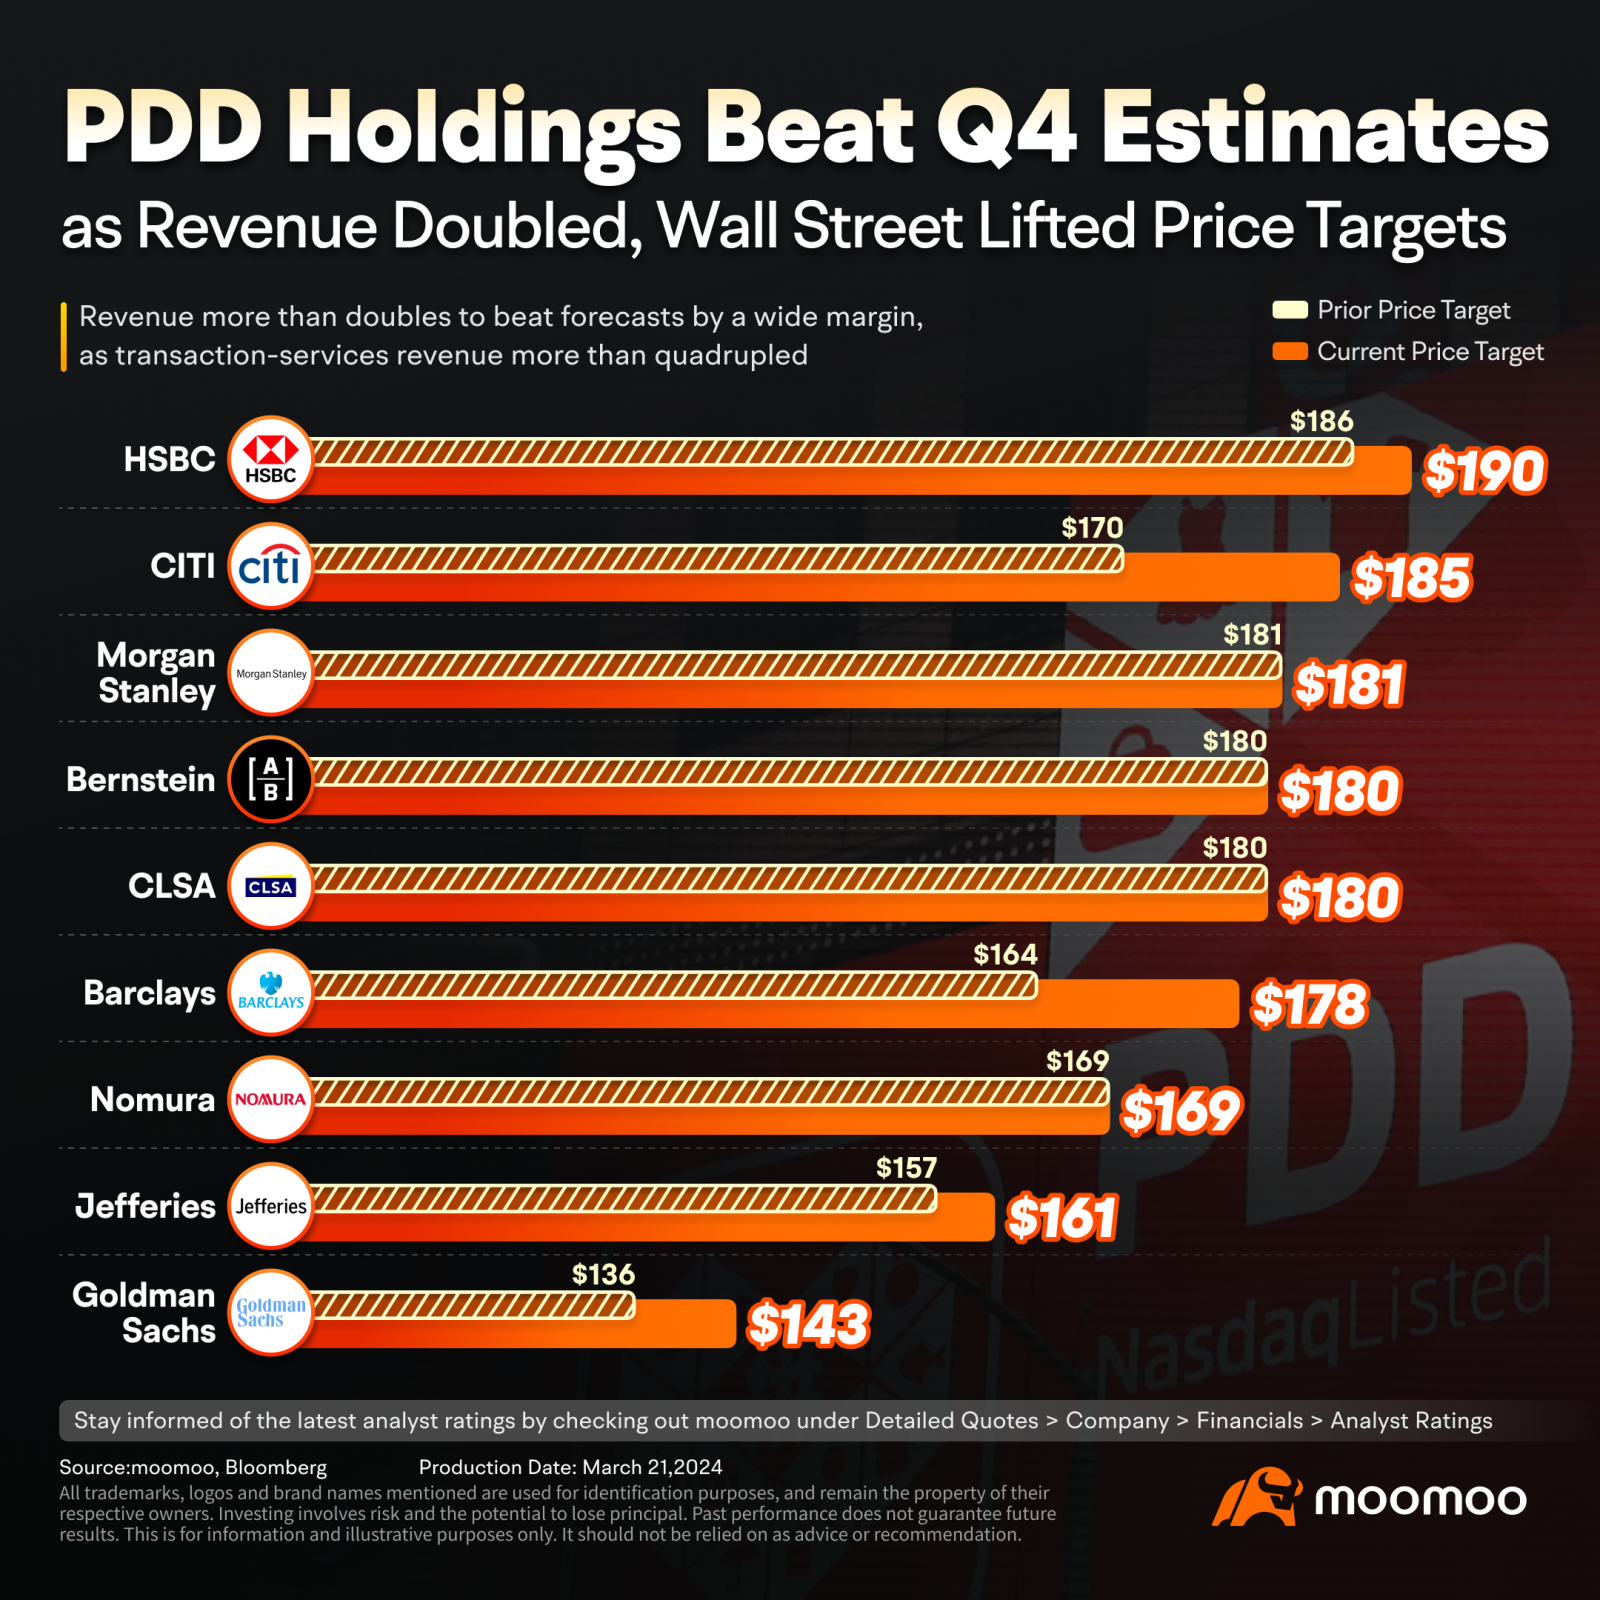 PDD Holdings Beat Q4 Estimates as Revenue Doubled, Wall Street Lifted Price Targets